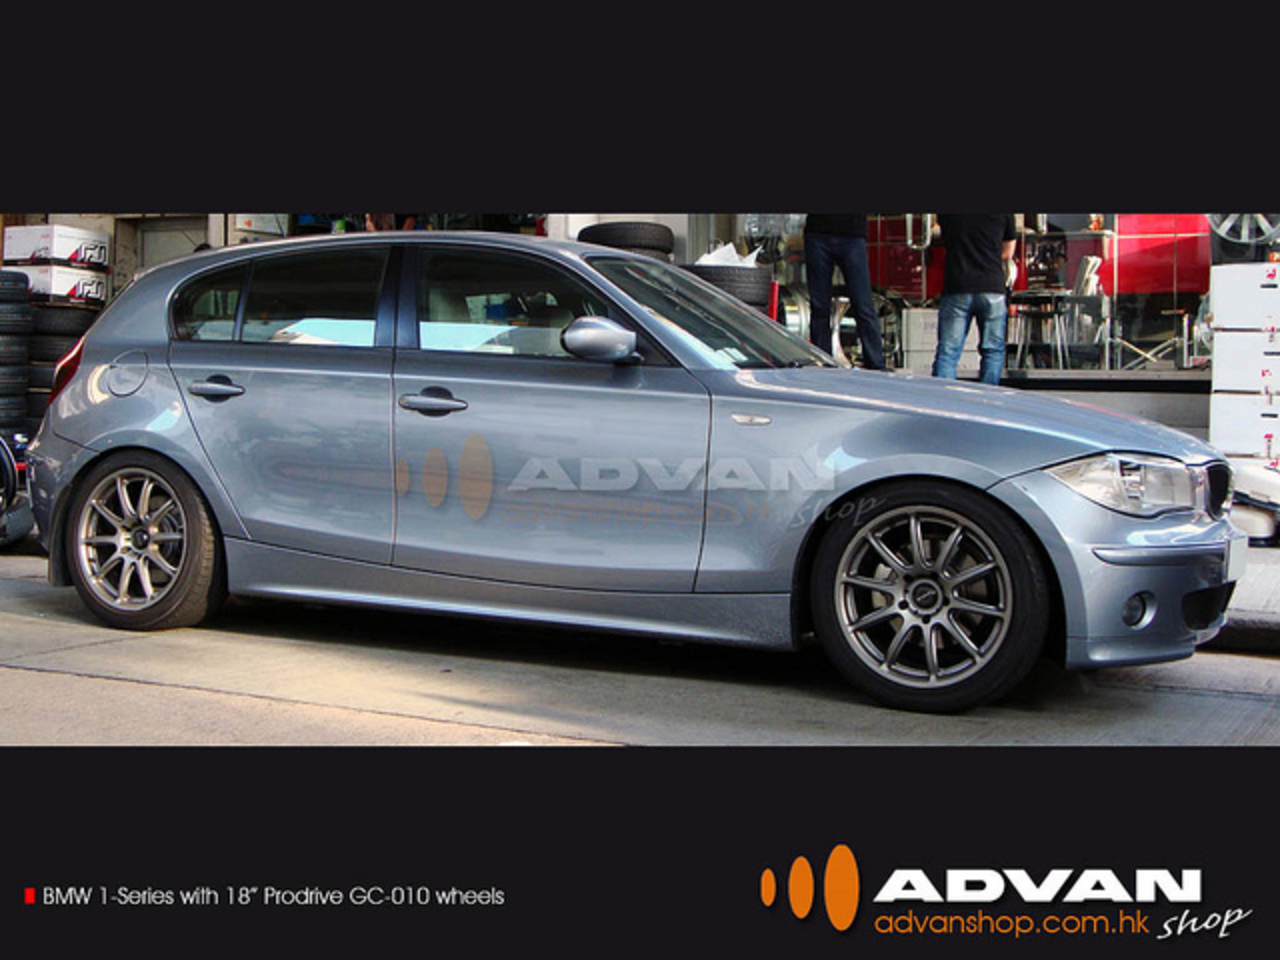 BMW 1-Series with 18" Prodrive GC-010 wheels | Flickr - Photo Sharing!